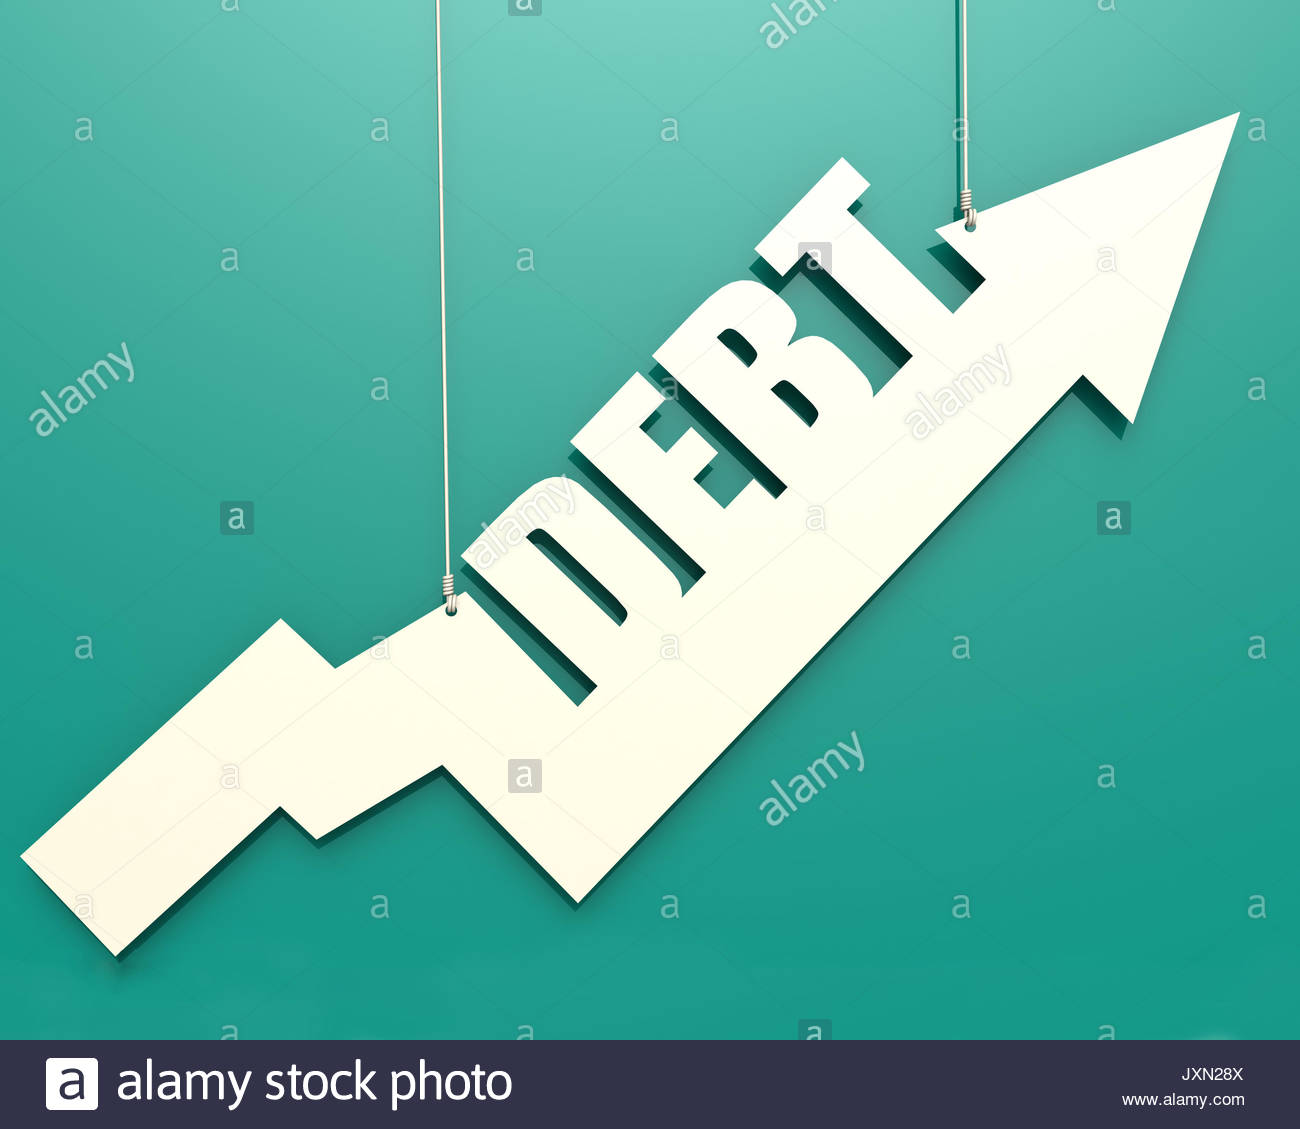 White Arrow With Debt Word Hang On Cyan Background Image Hi